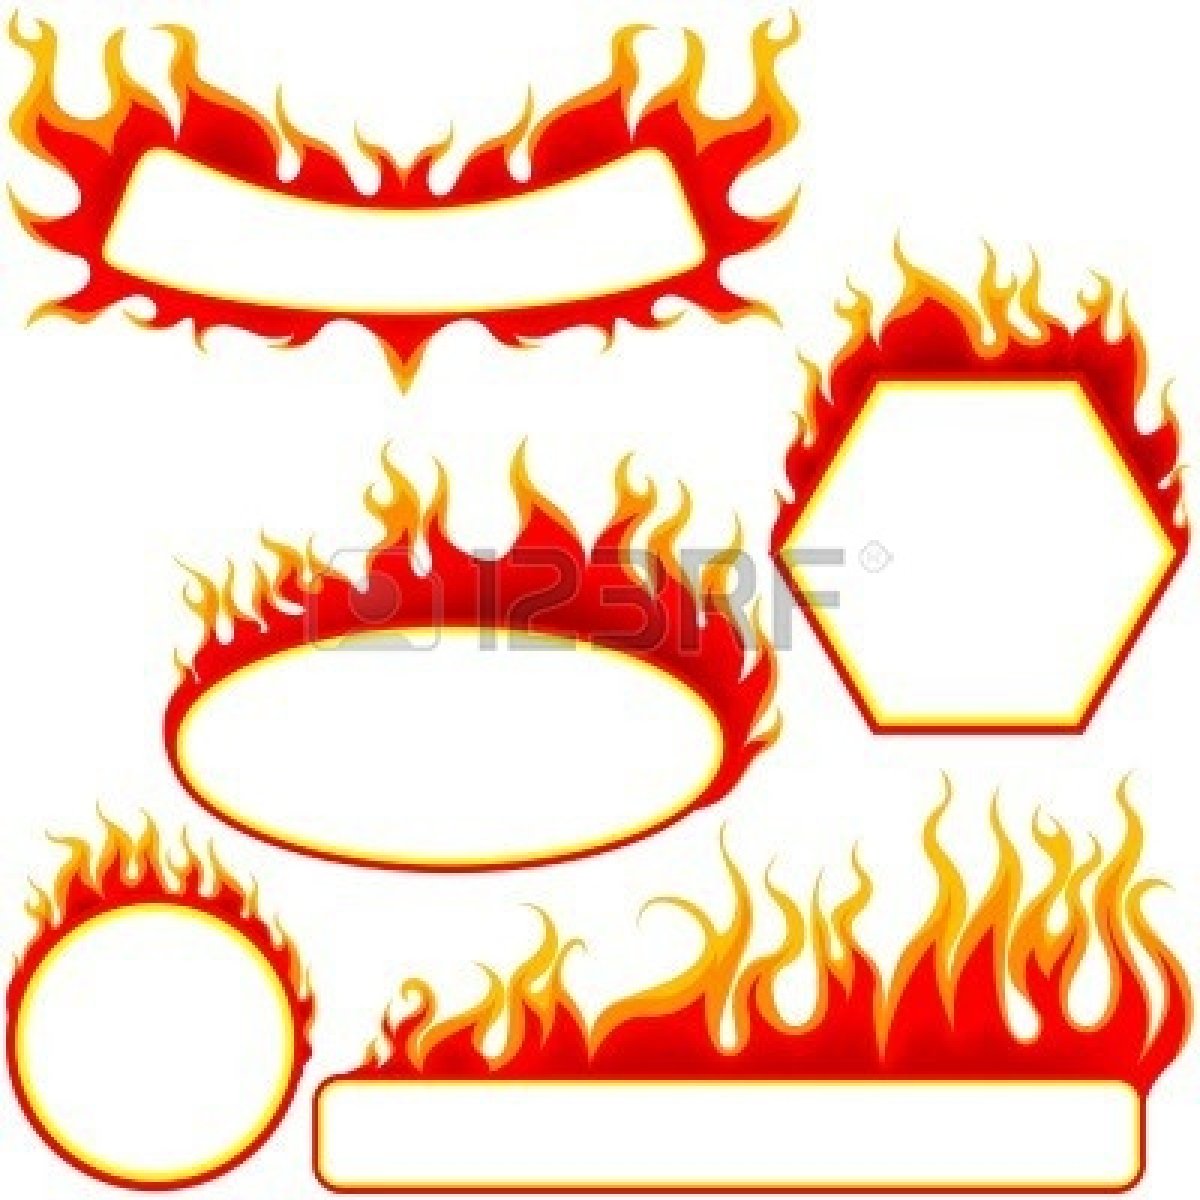 Flame border clipart 5 » Clipart Station.